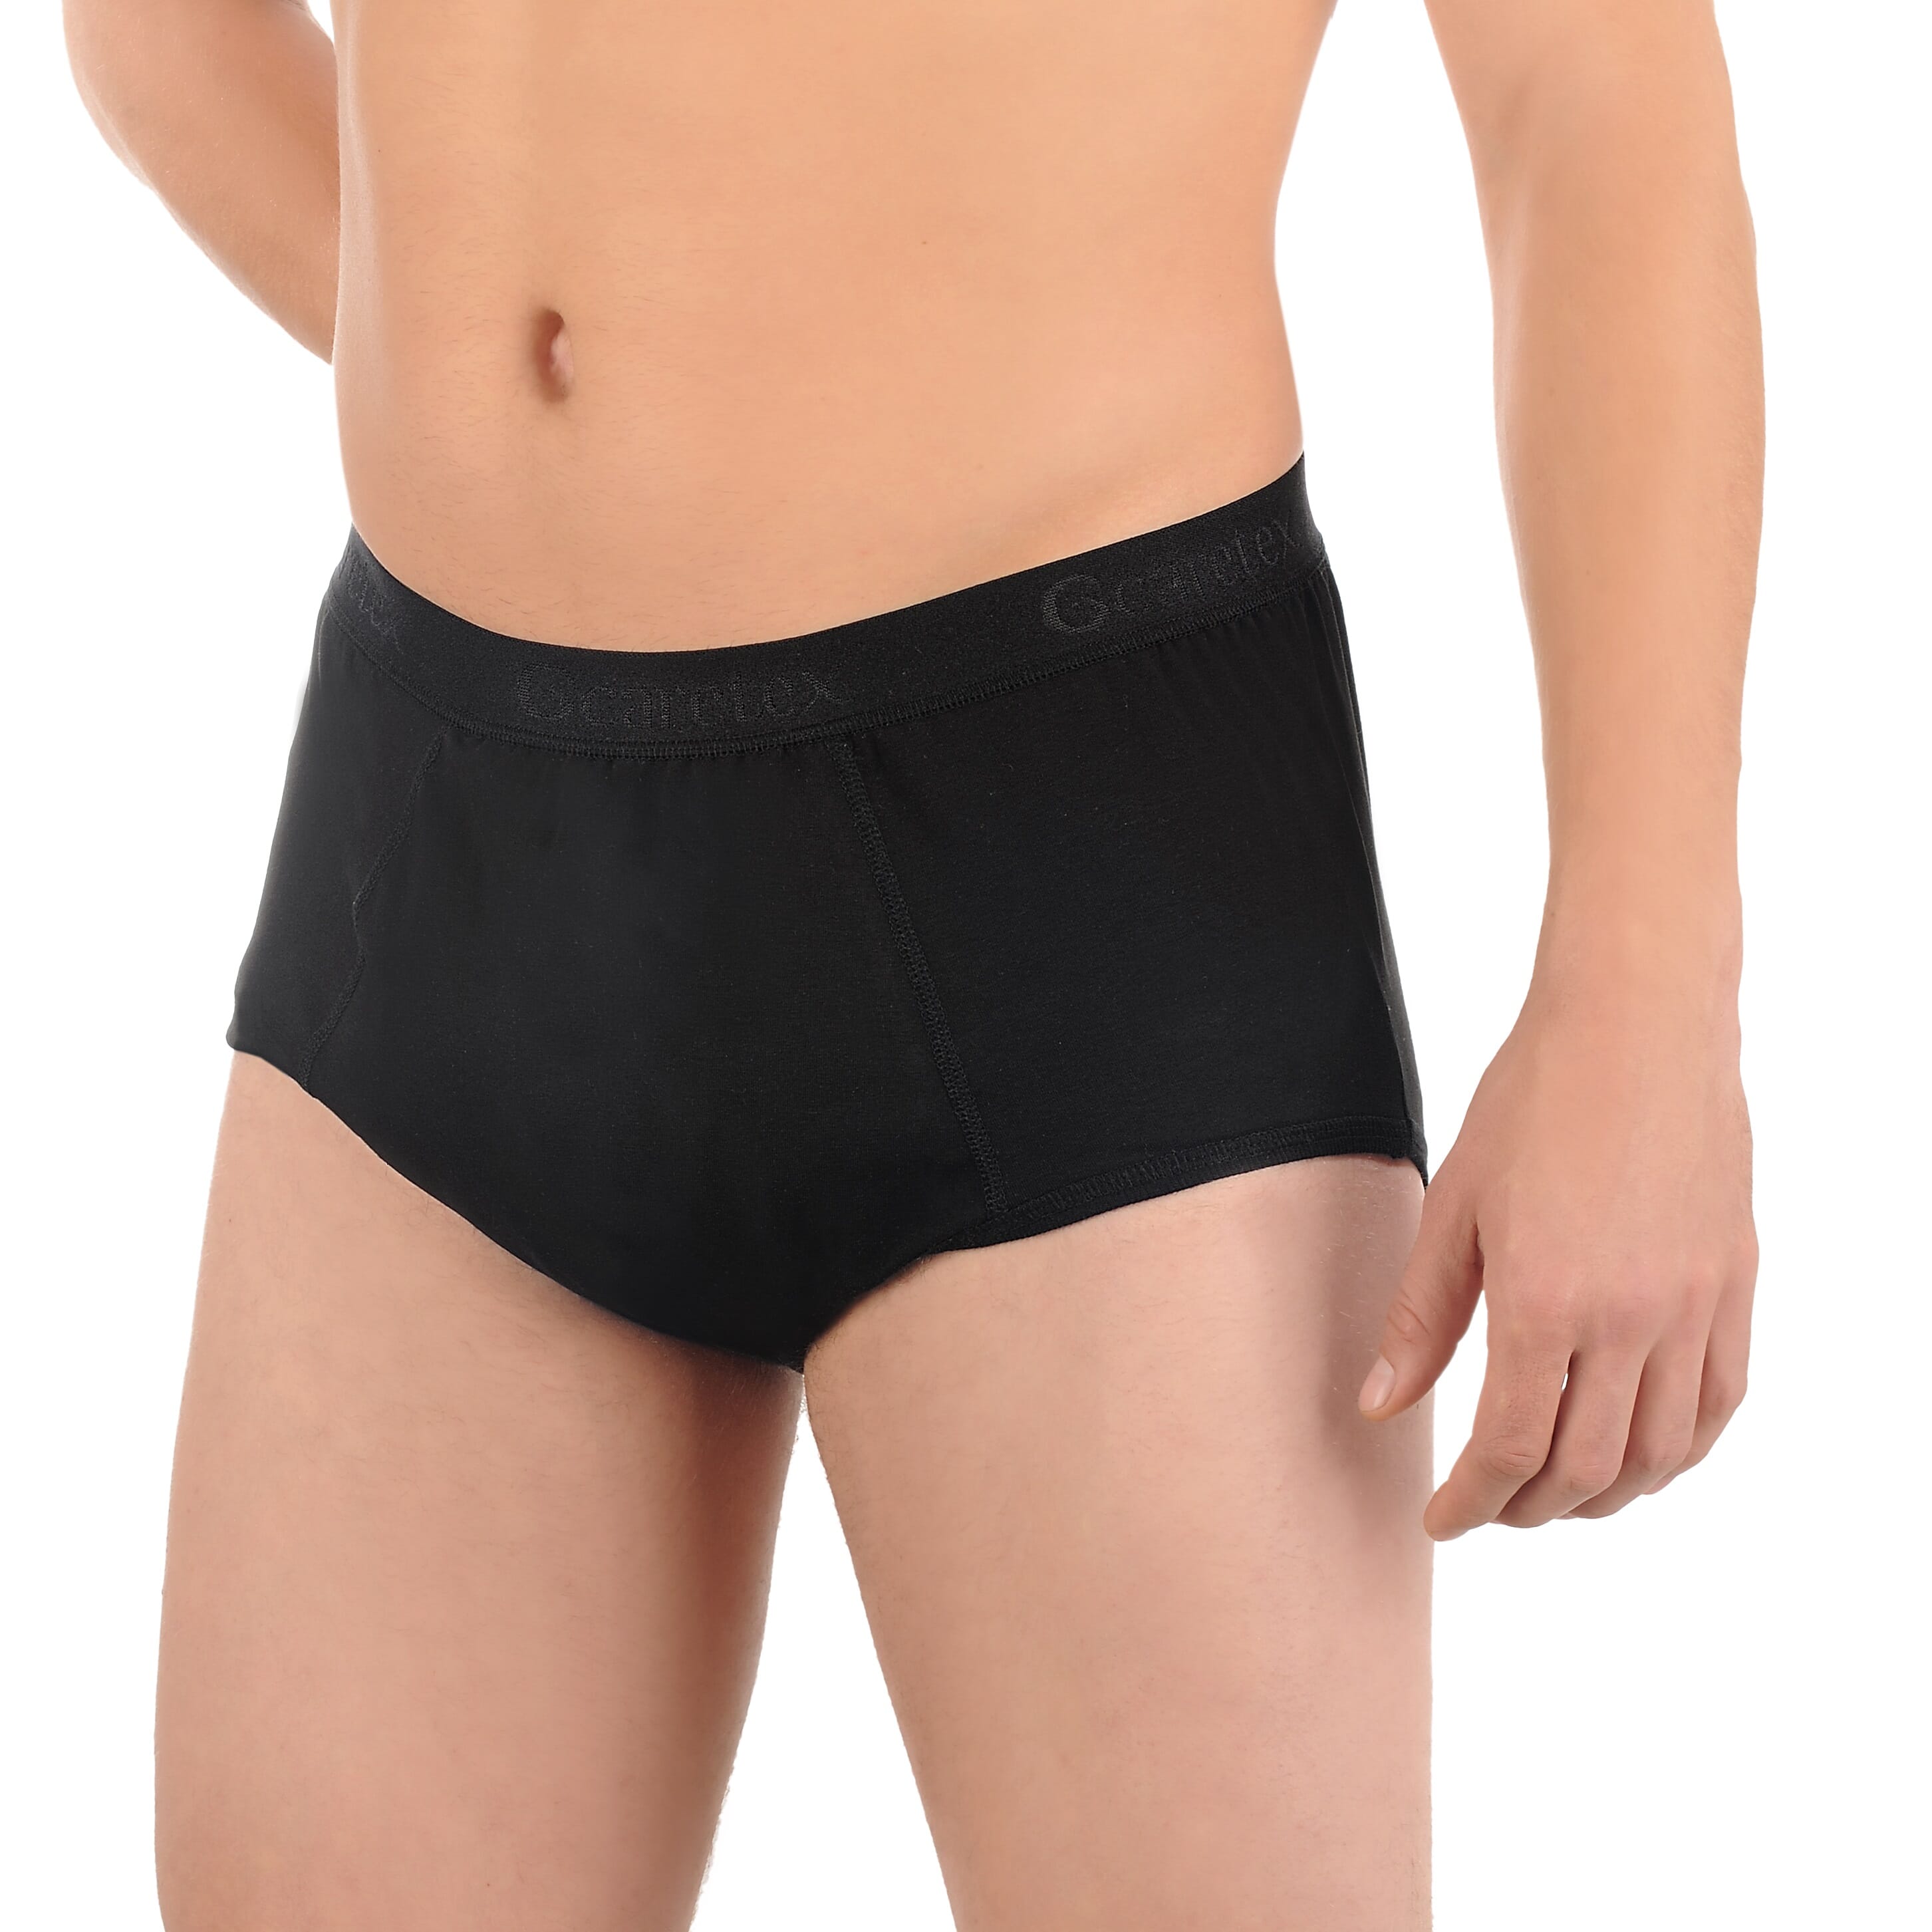  AIRCUTE Absorbent Urinary Incontinence Underwear for